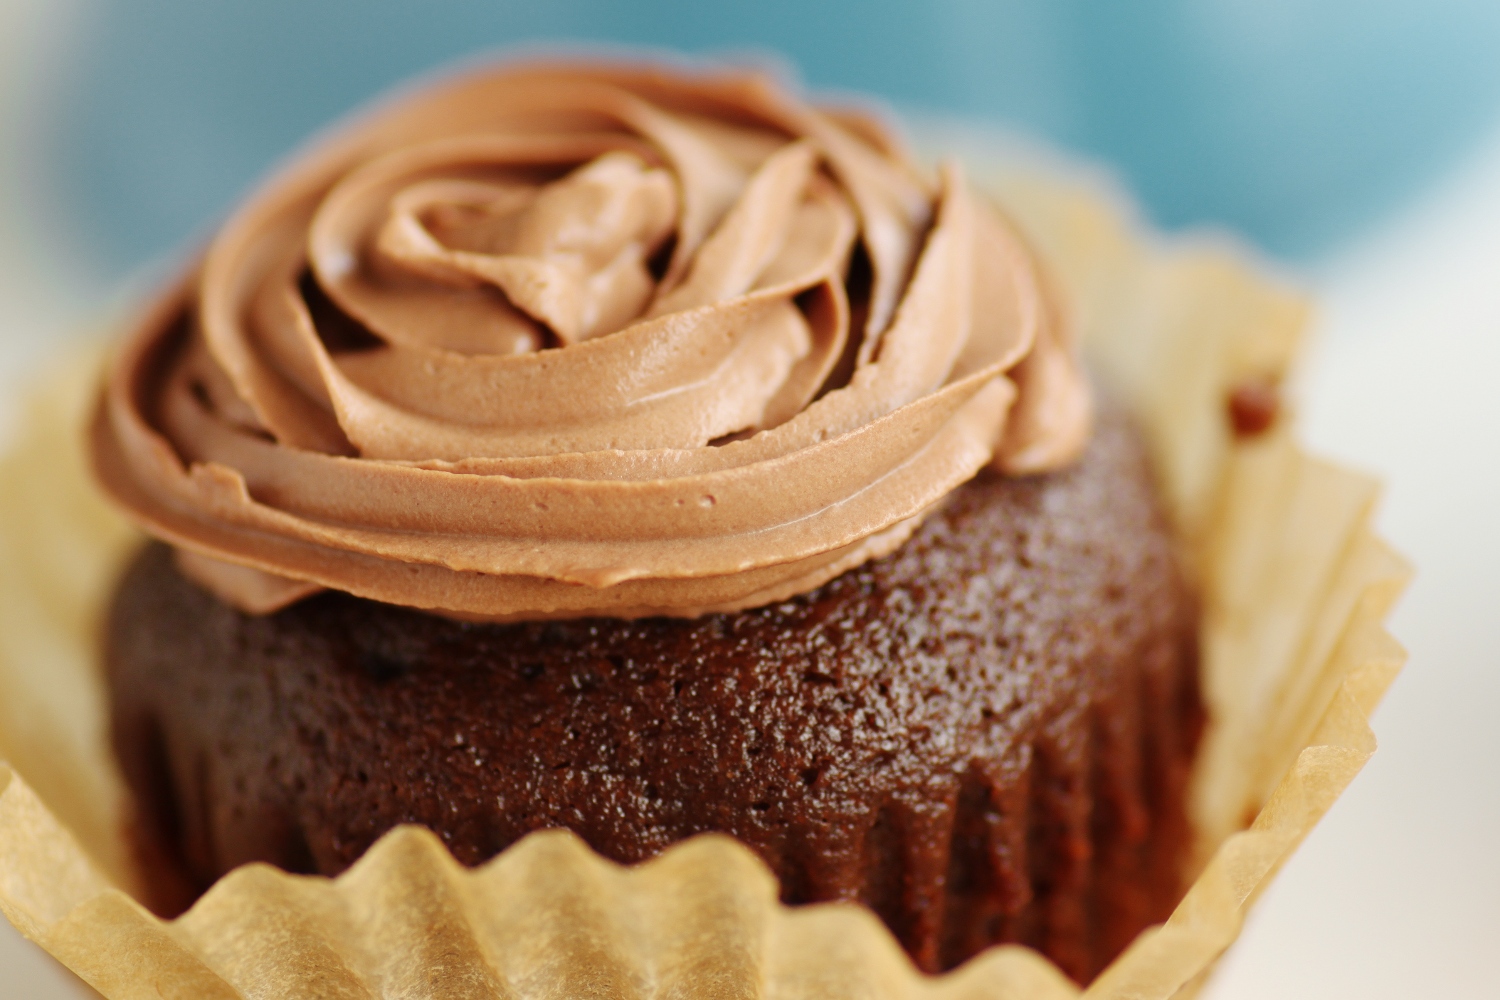 kahlua cupcakes with chocolate mousse frosting